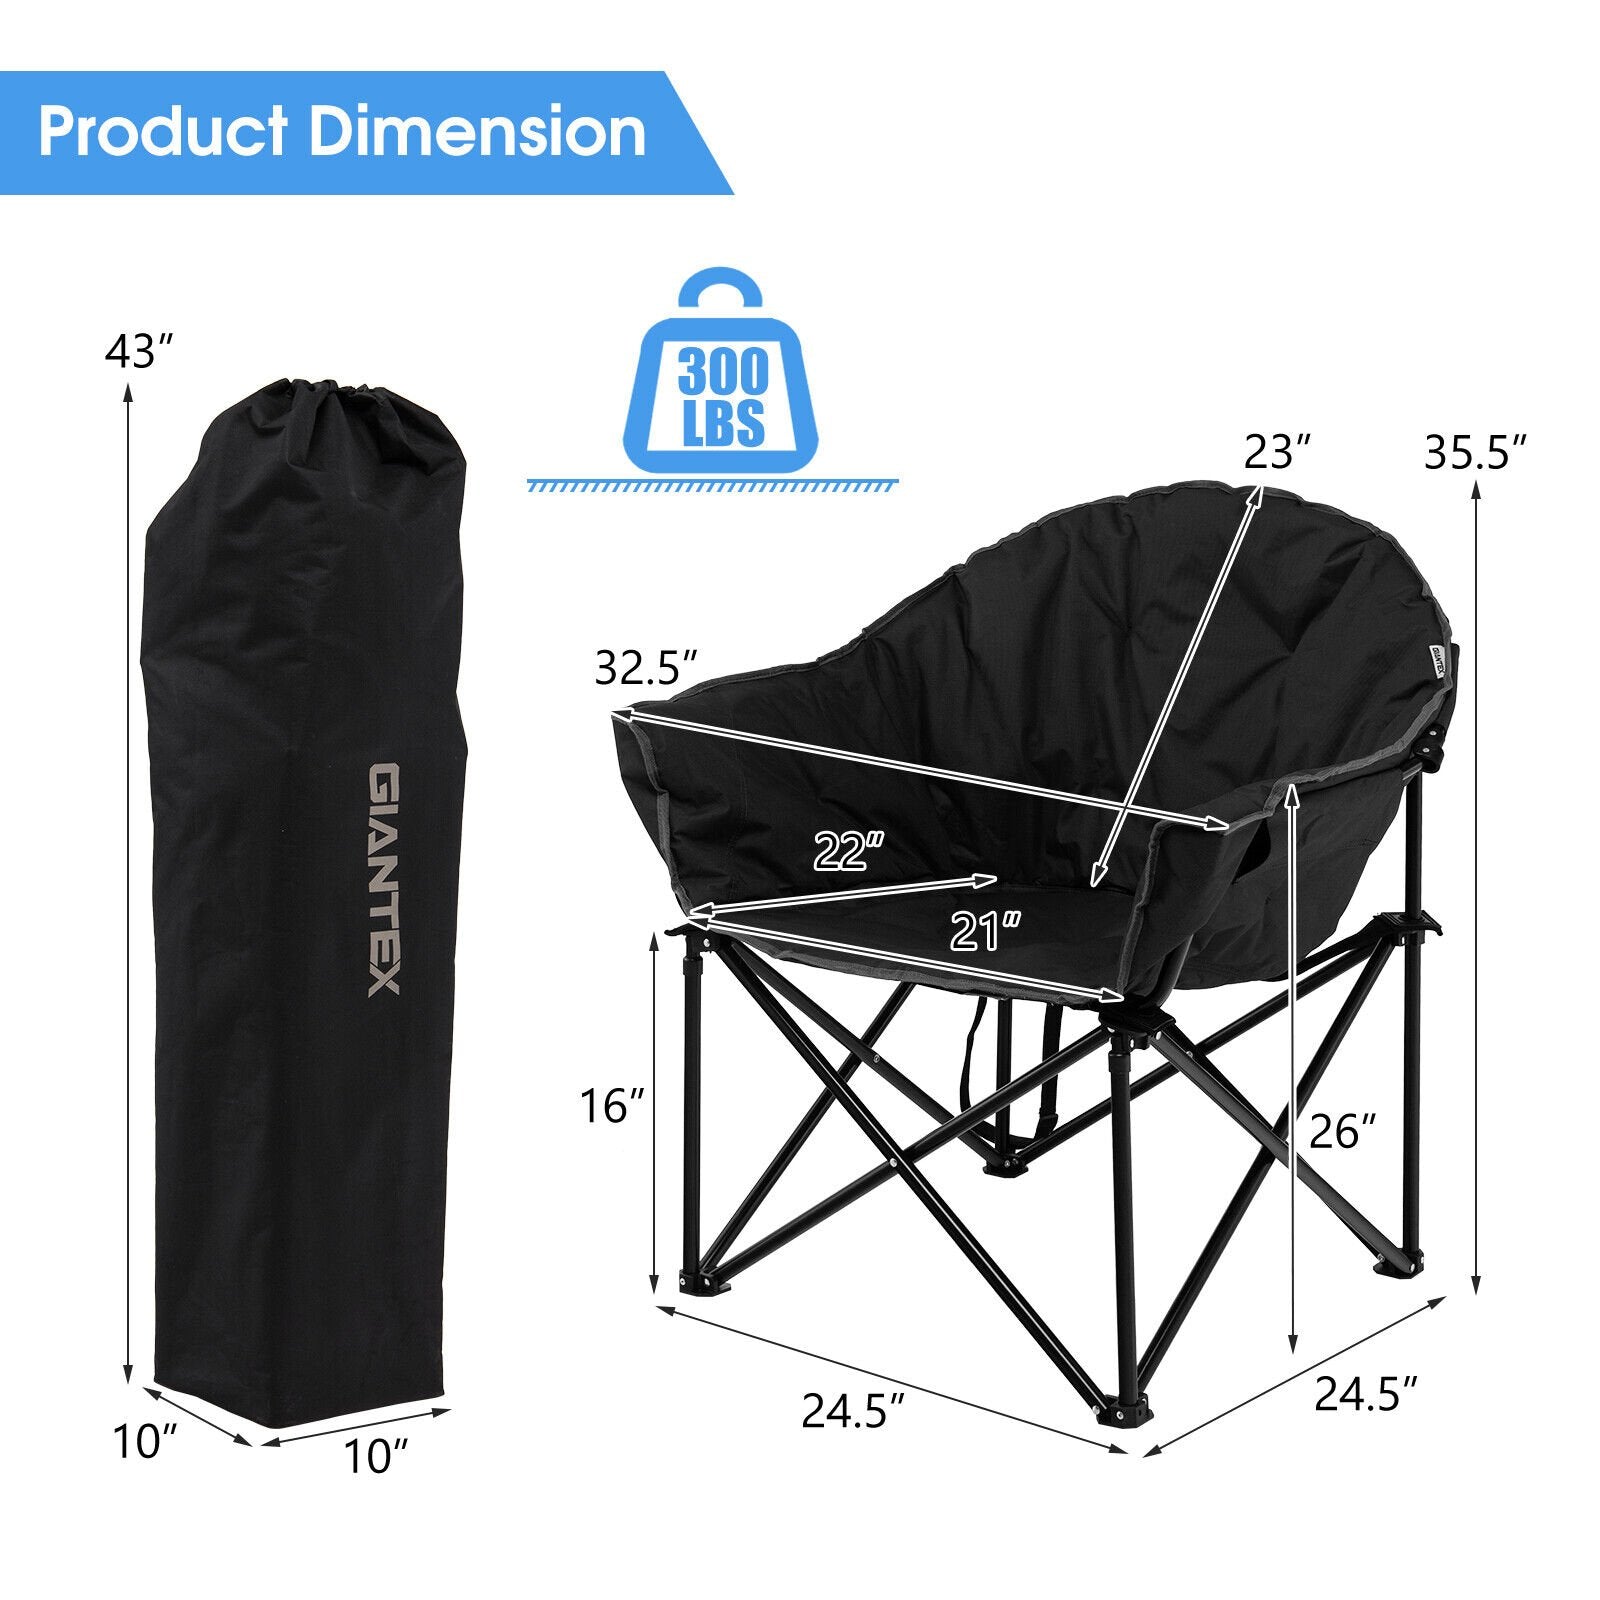 Folding Camping Moon Padded Chair with Carrying Bag, Black - Gallery Canada